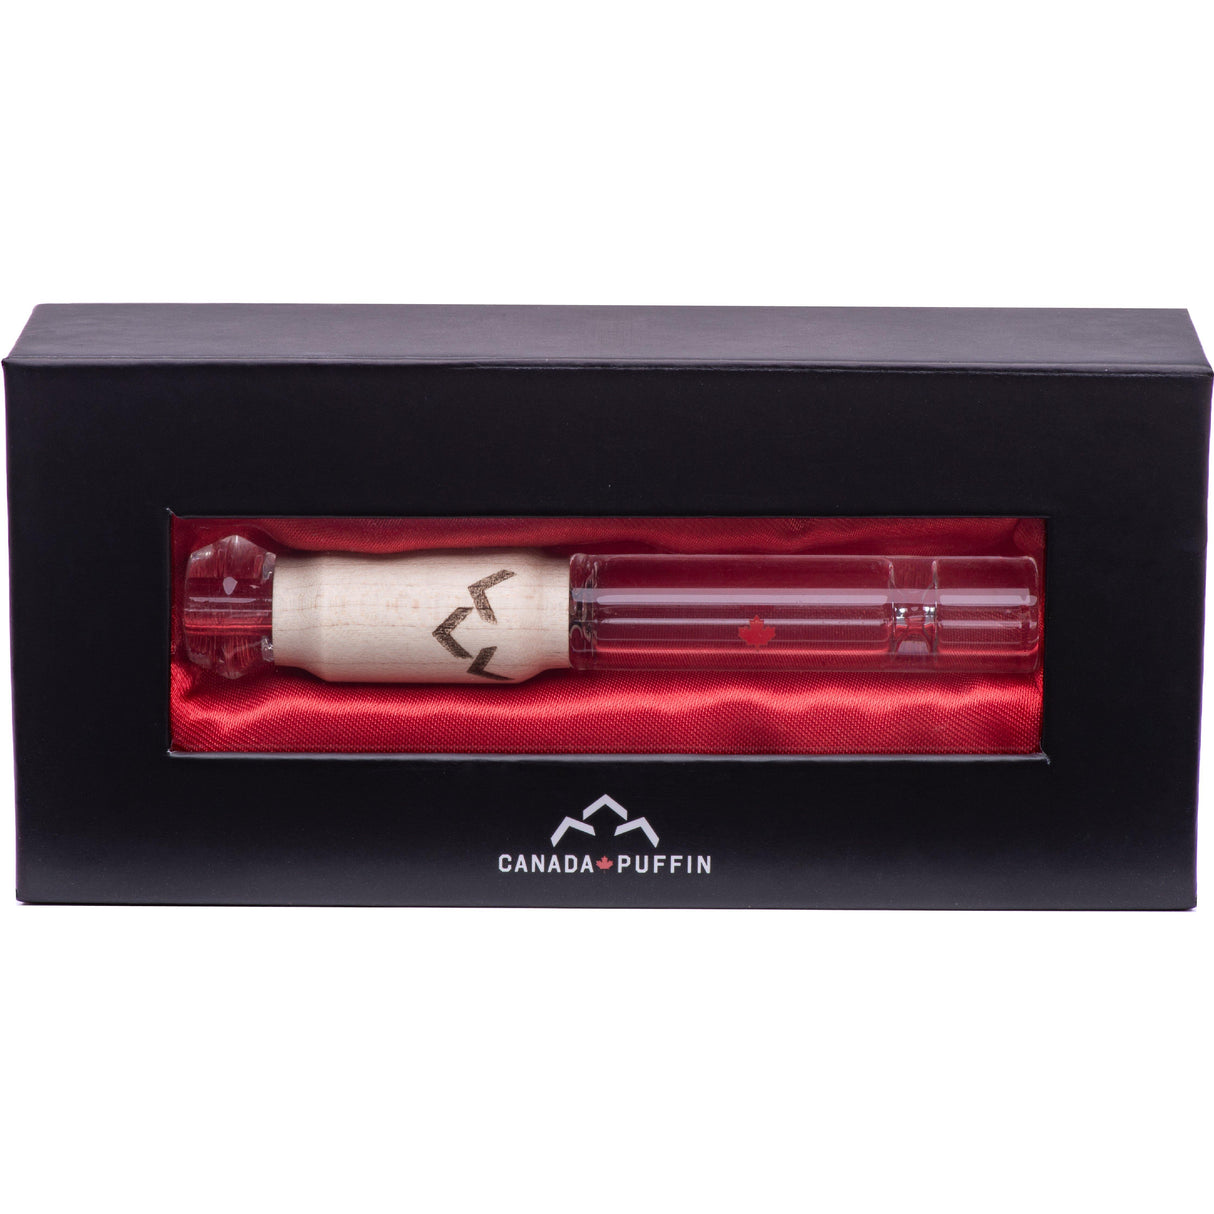 Canada Puffin Northern Lights Taster Pipe in Box - Front View on Red Silk